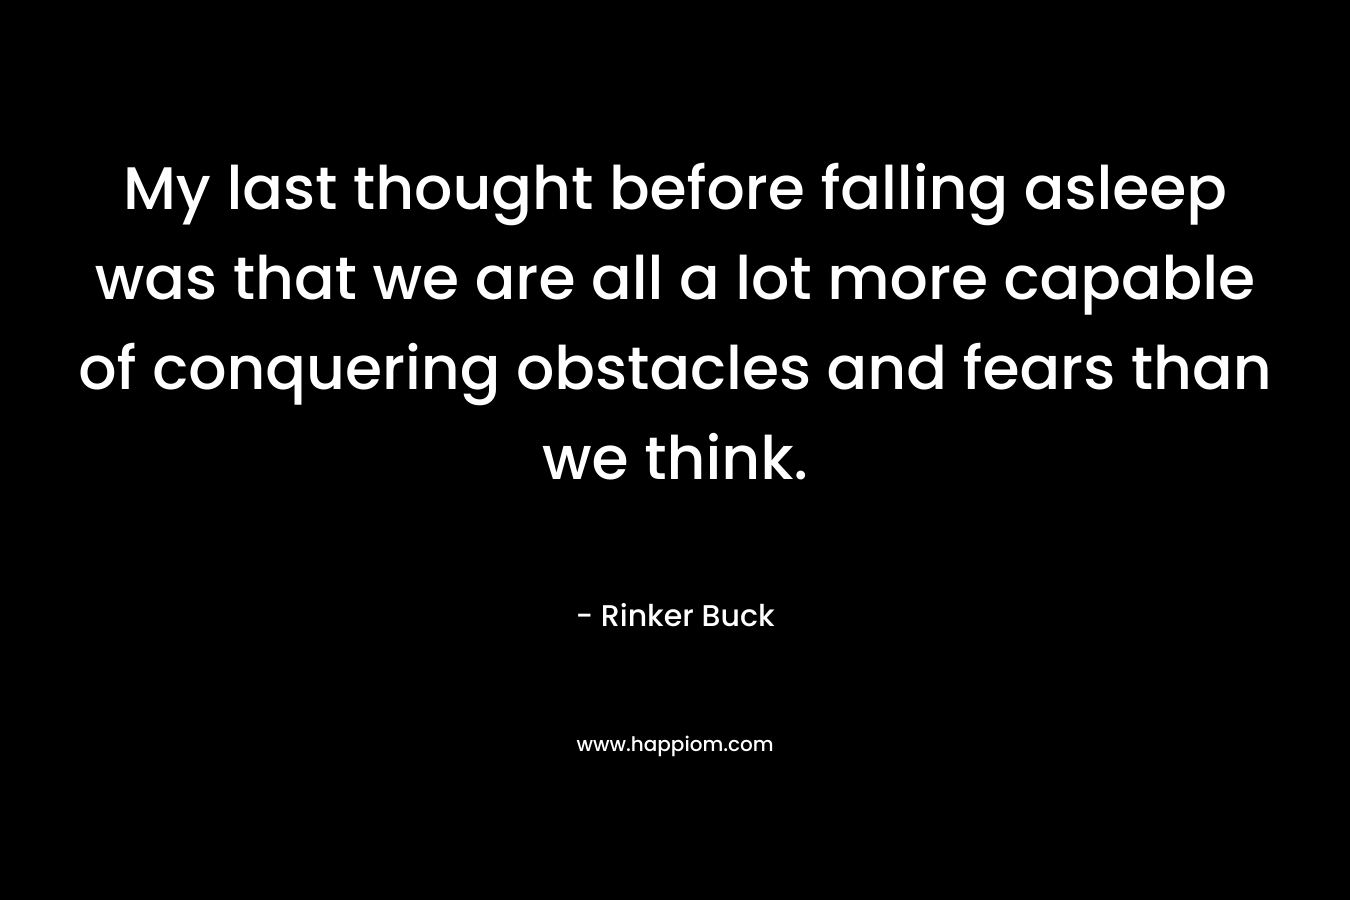 My last thought before falling asleep was that we are all a lot more capable of conquering obstacles and fears than we think. – Rinker Buck